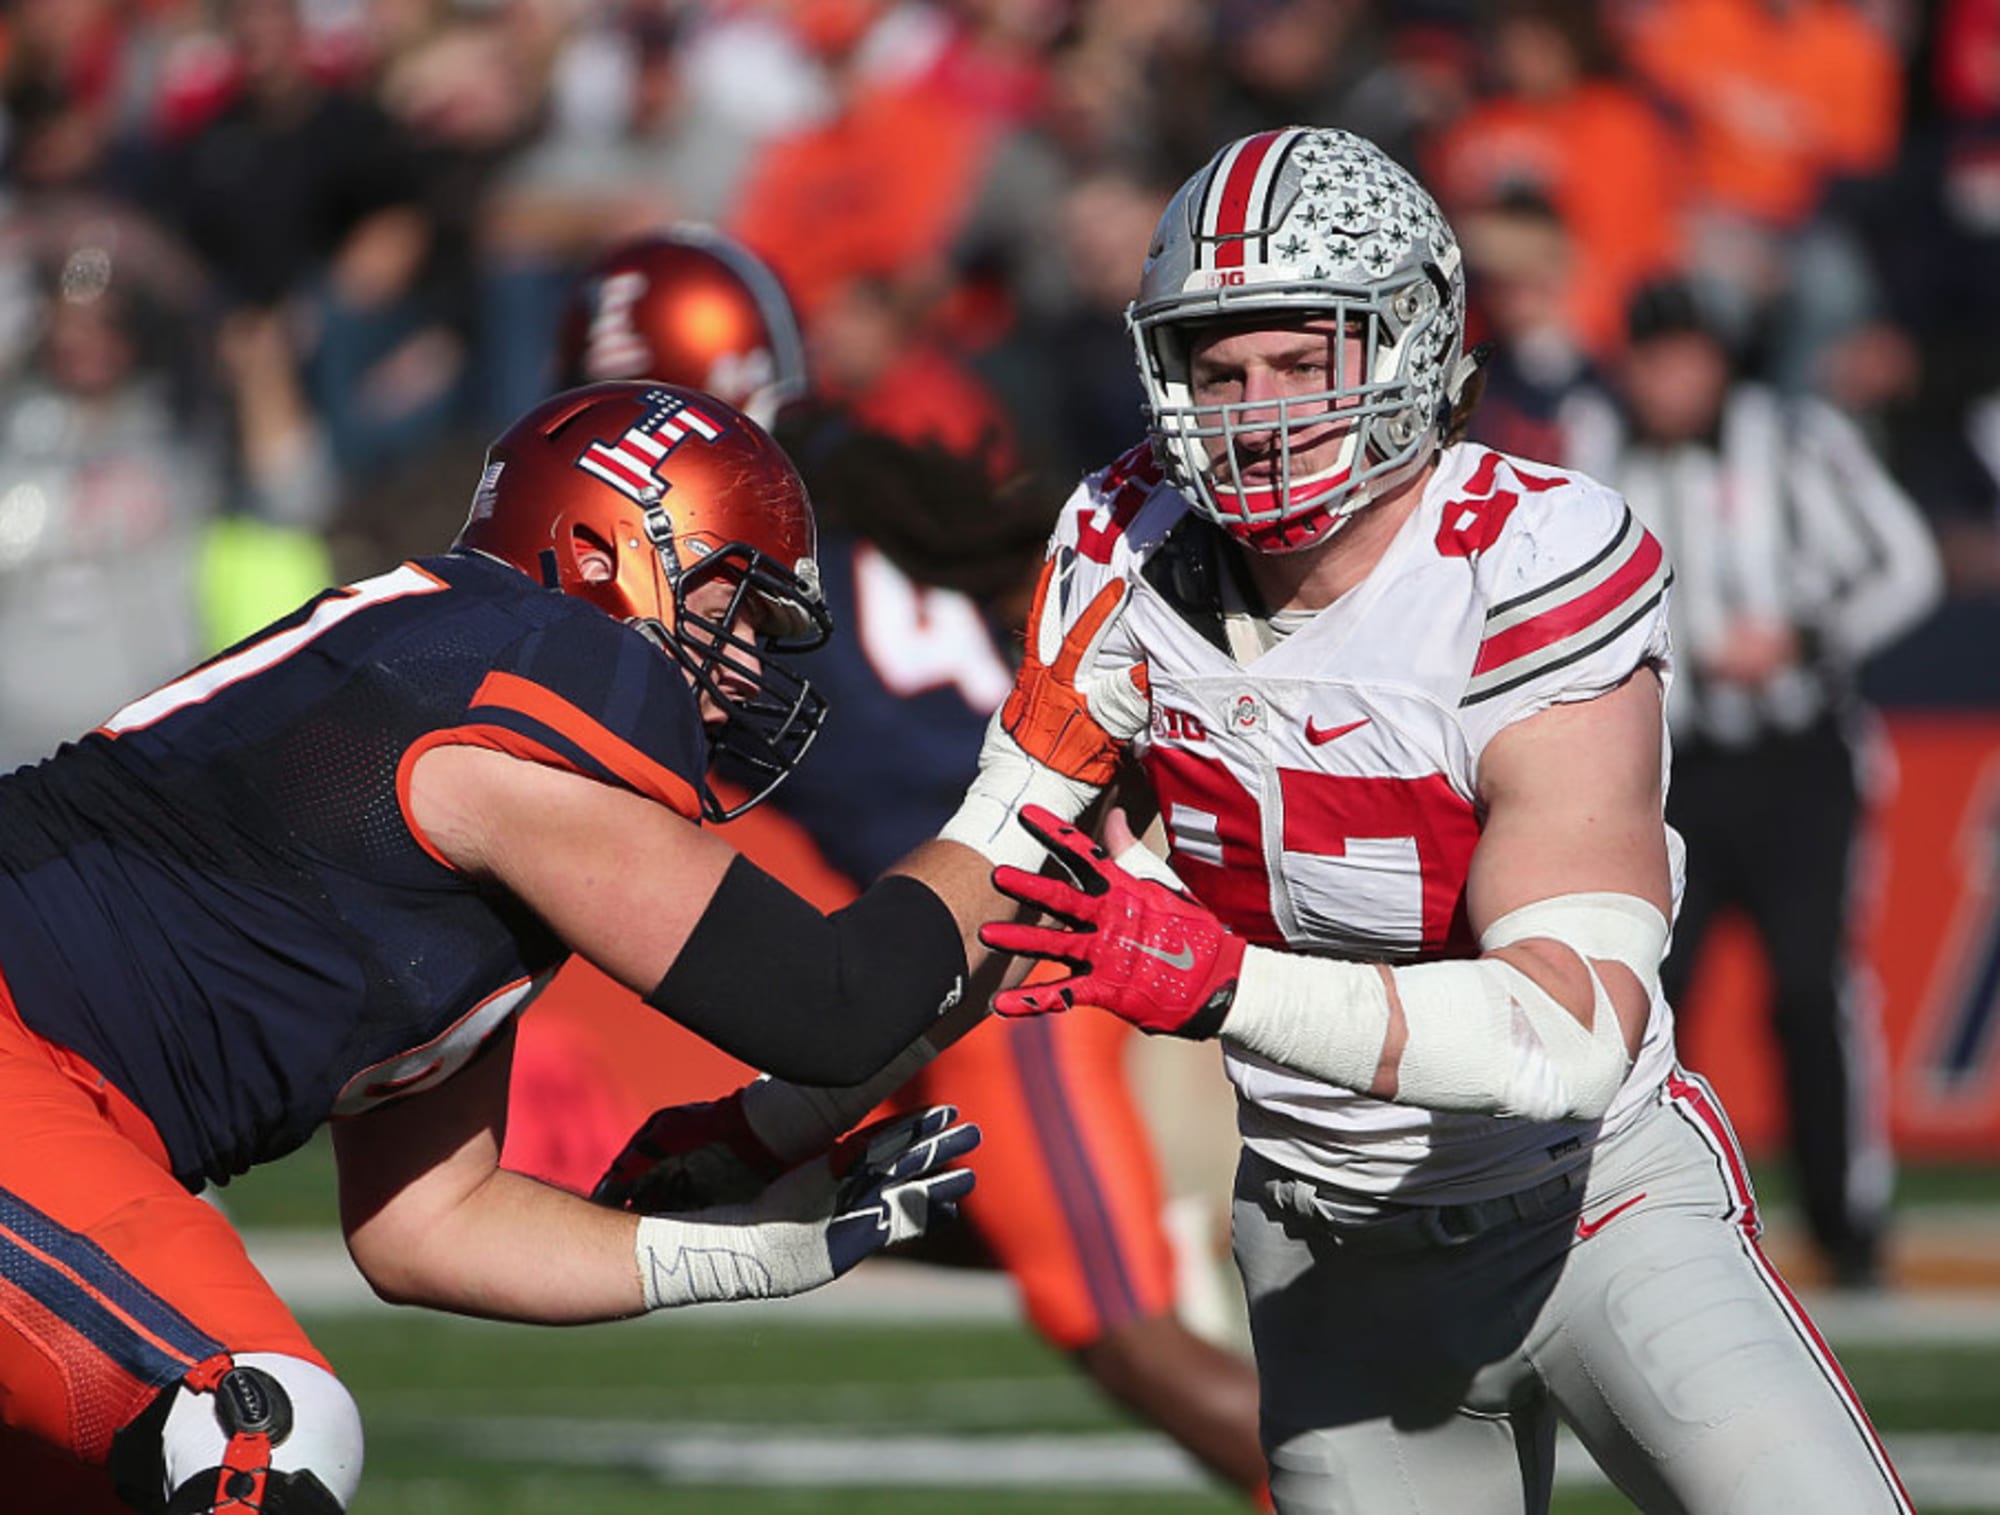 Joey Bosa is a Model of Versatility for the San Diego Chargers